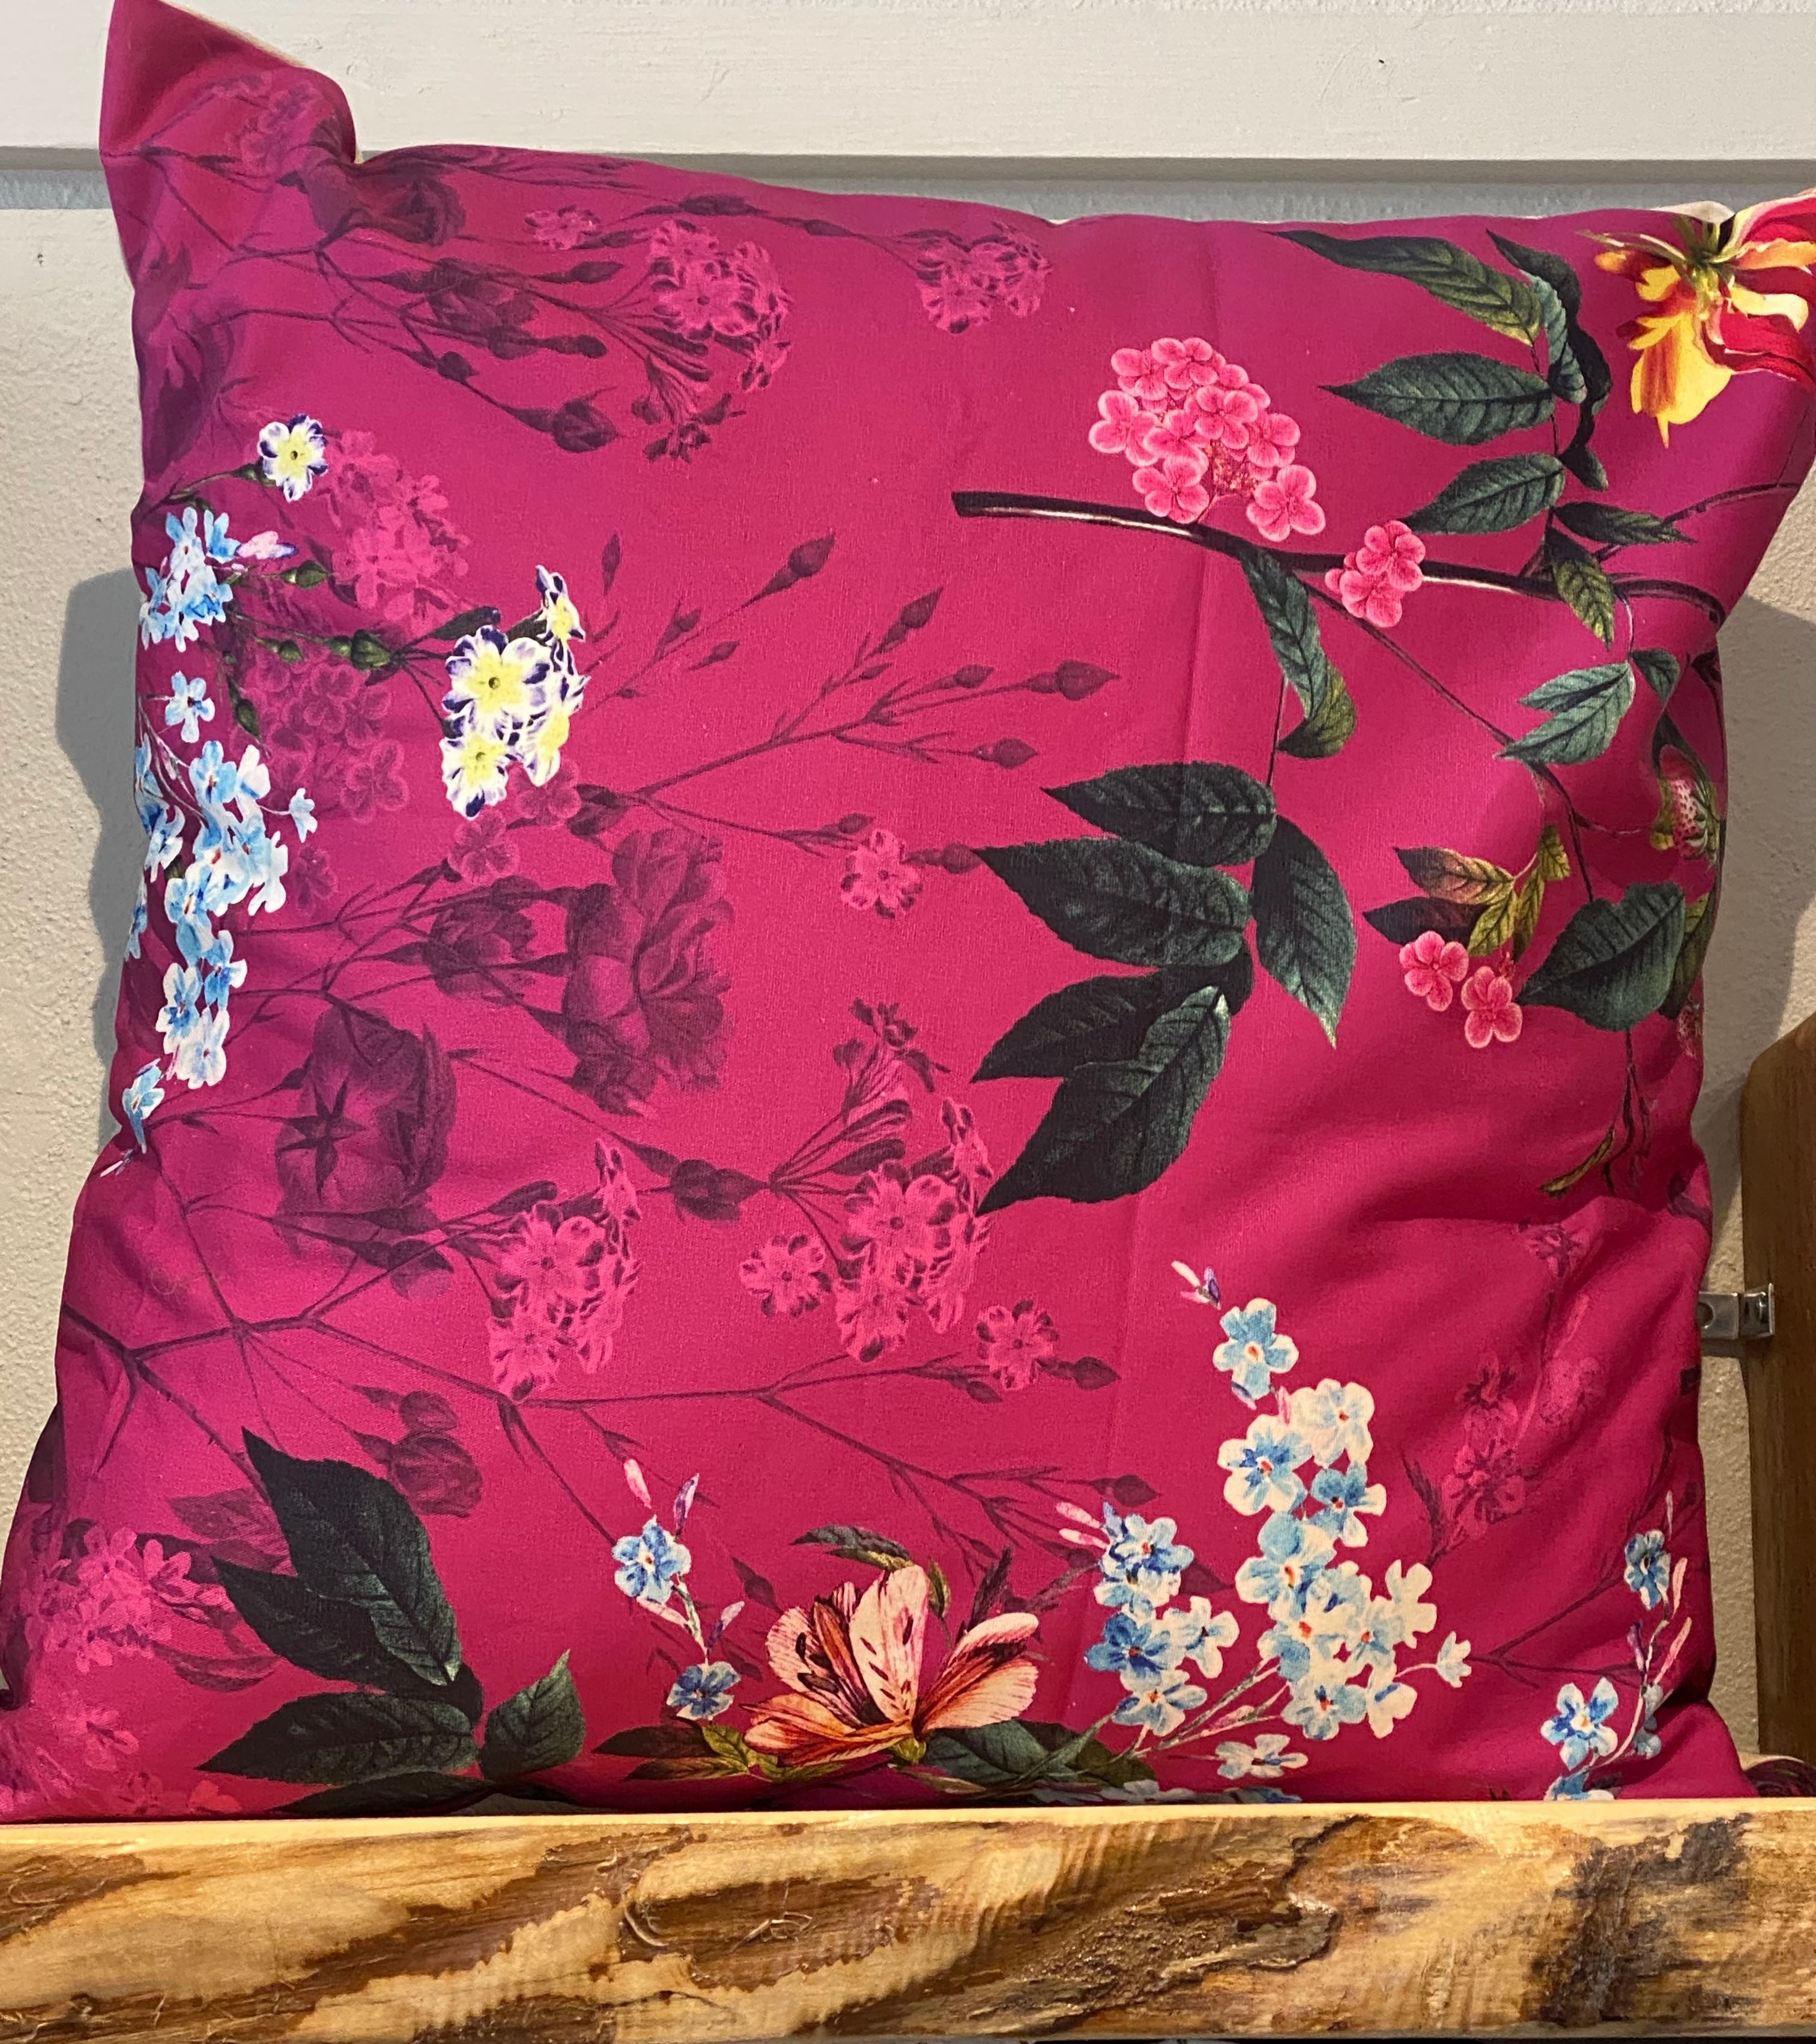 Vibrant pink Cushion with or without insert 60 x 60cm.